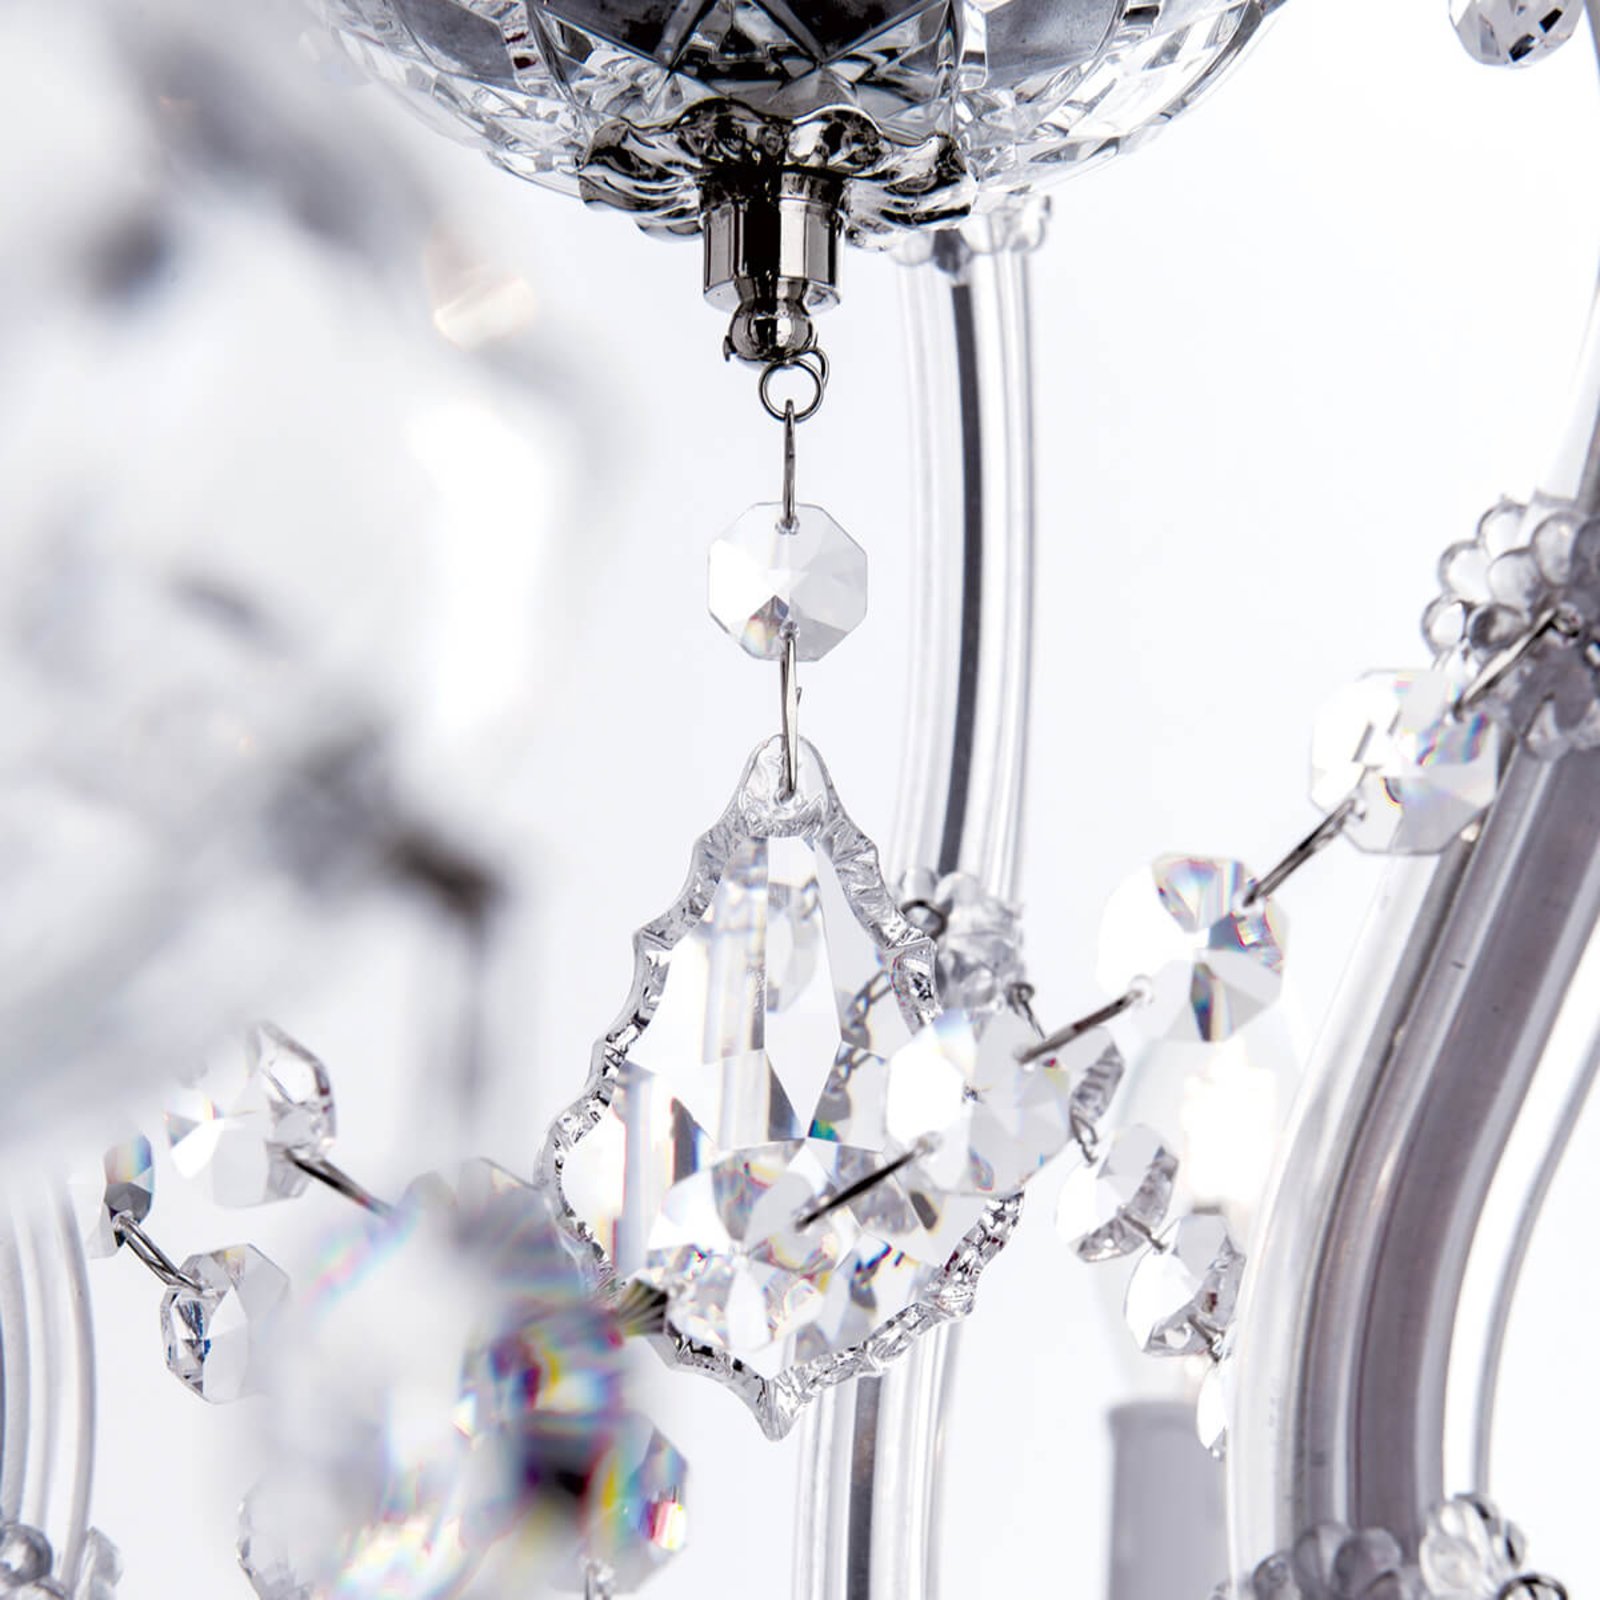 Maria Theresia - luxurious crystal chandelier